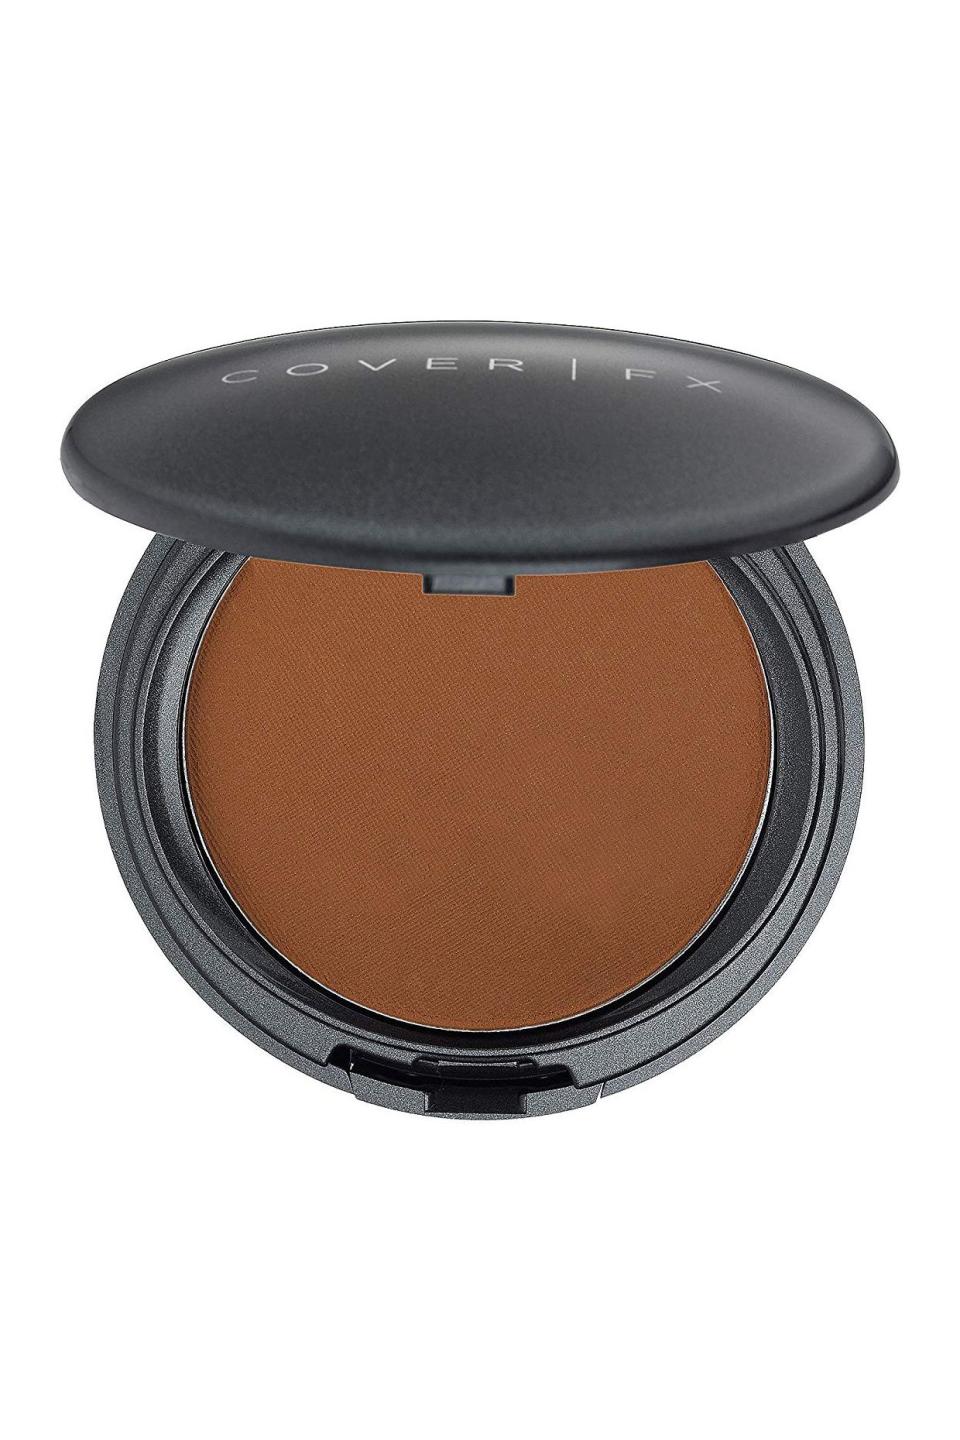 3) Cover Fx Pressed Mineral Foundation